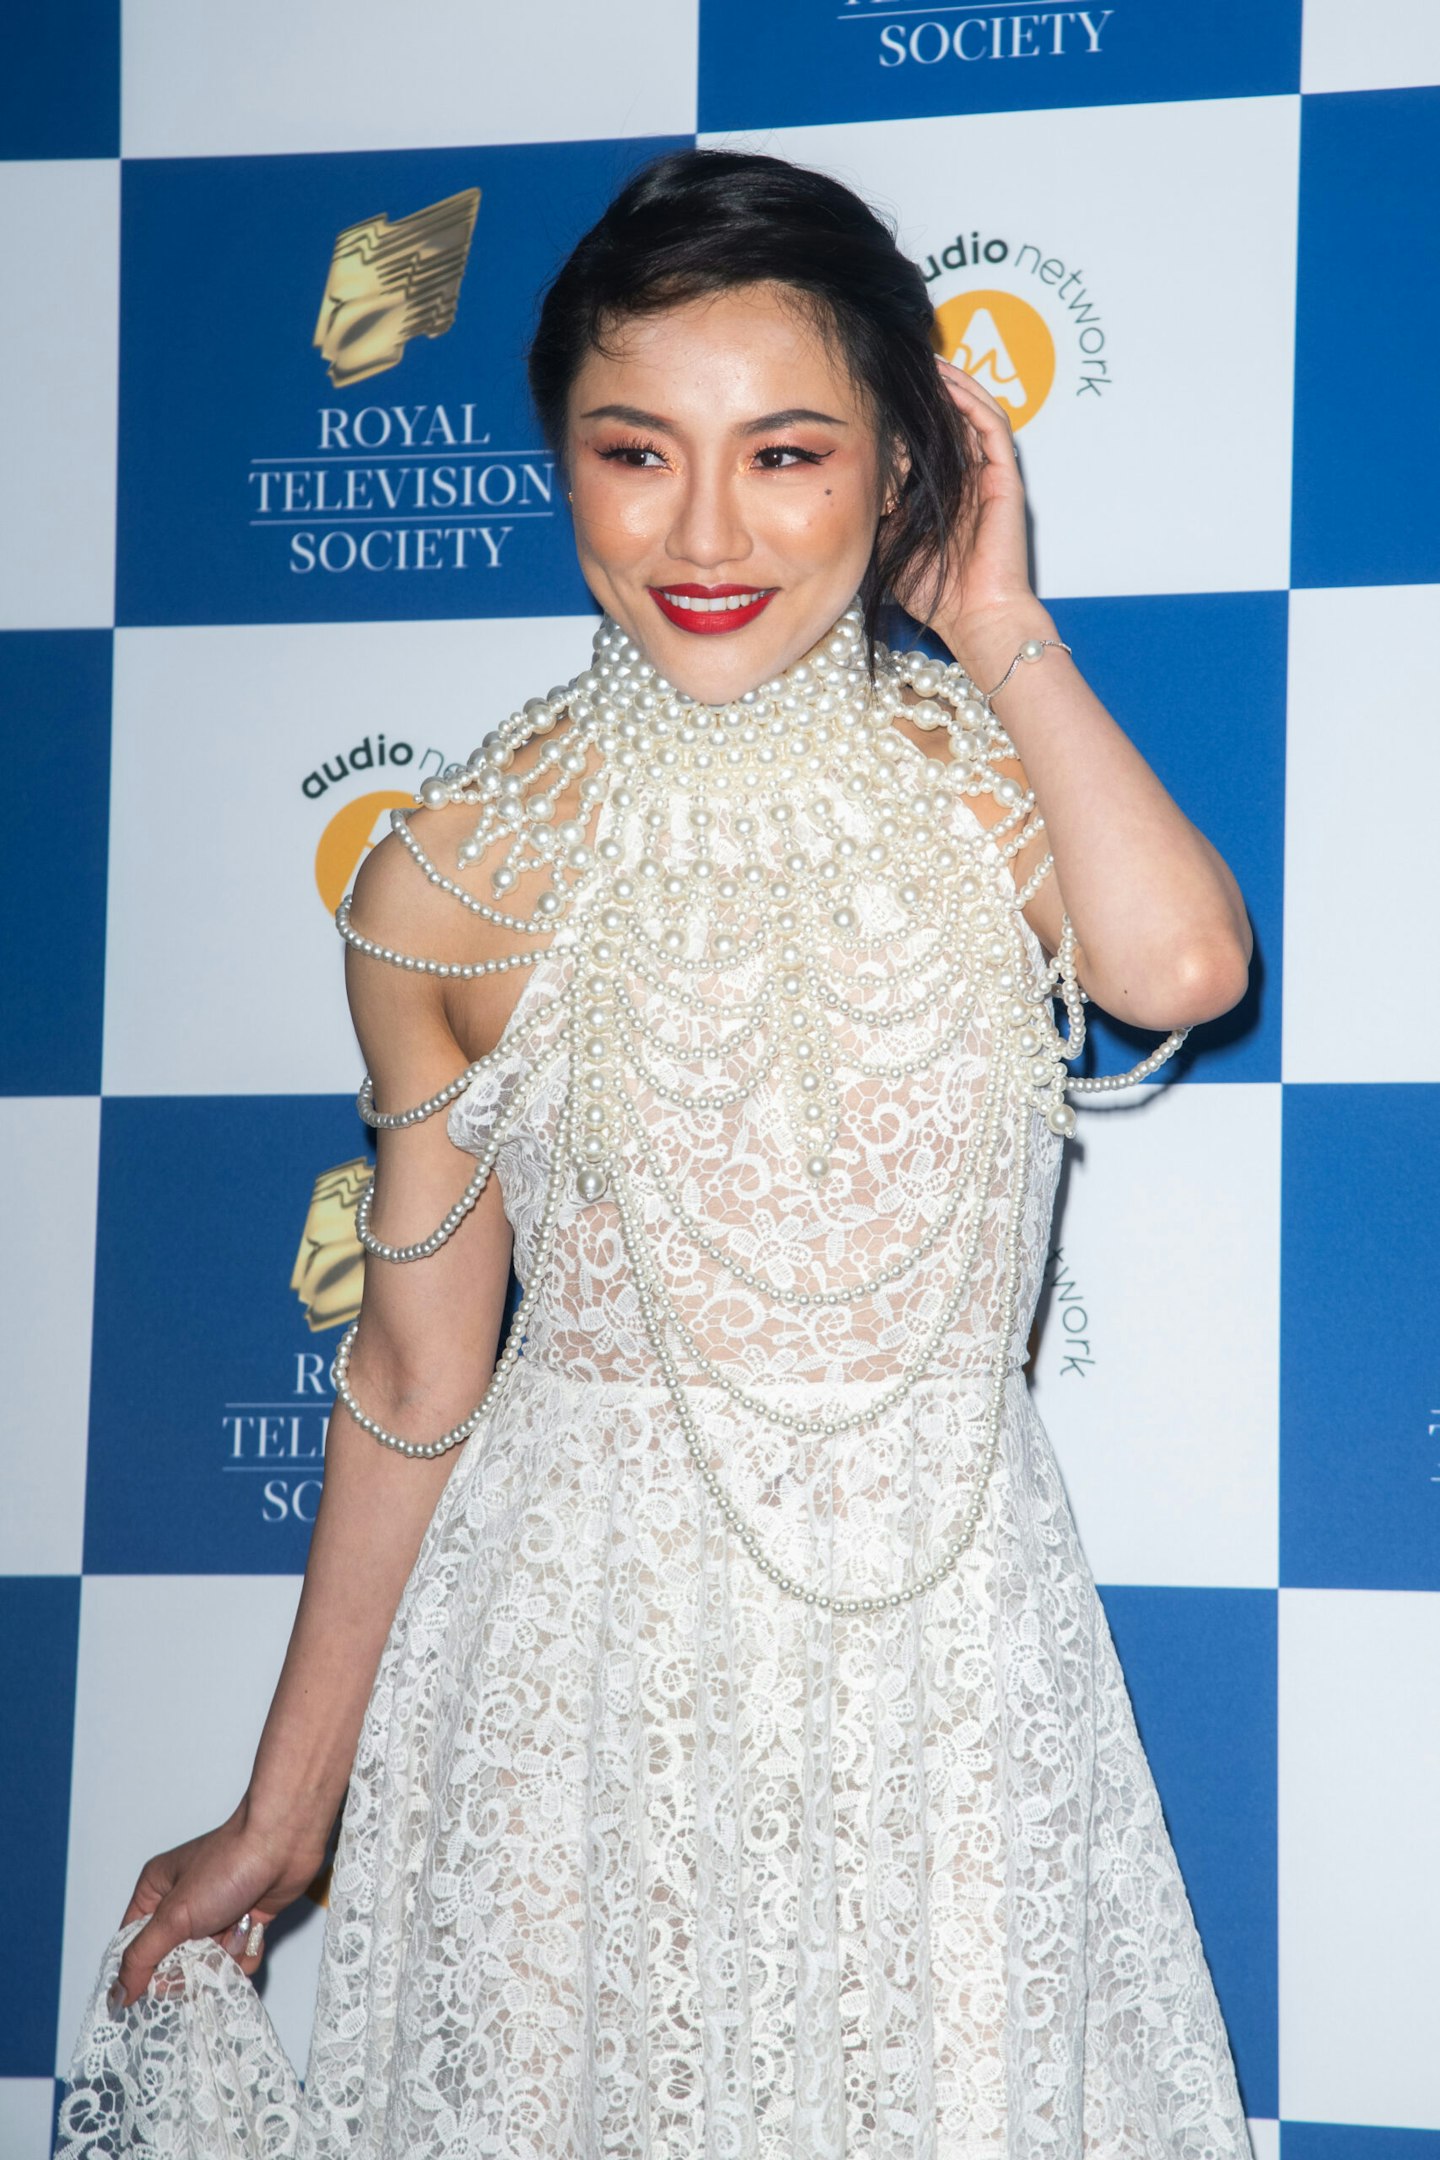 Nancy Xu attends the Royal Television Society Programme Awards at The Grosvenor House Hotel on March 29, 2022 in London, England.